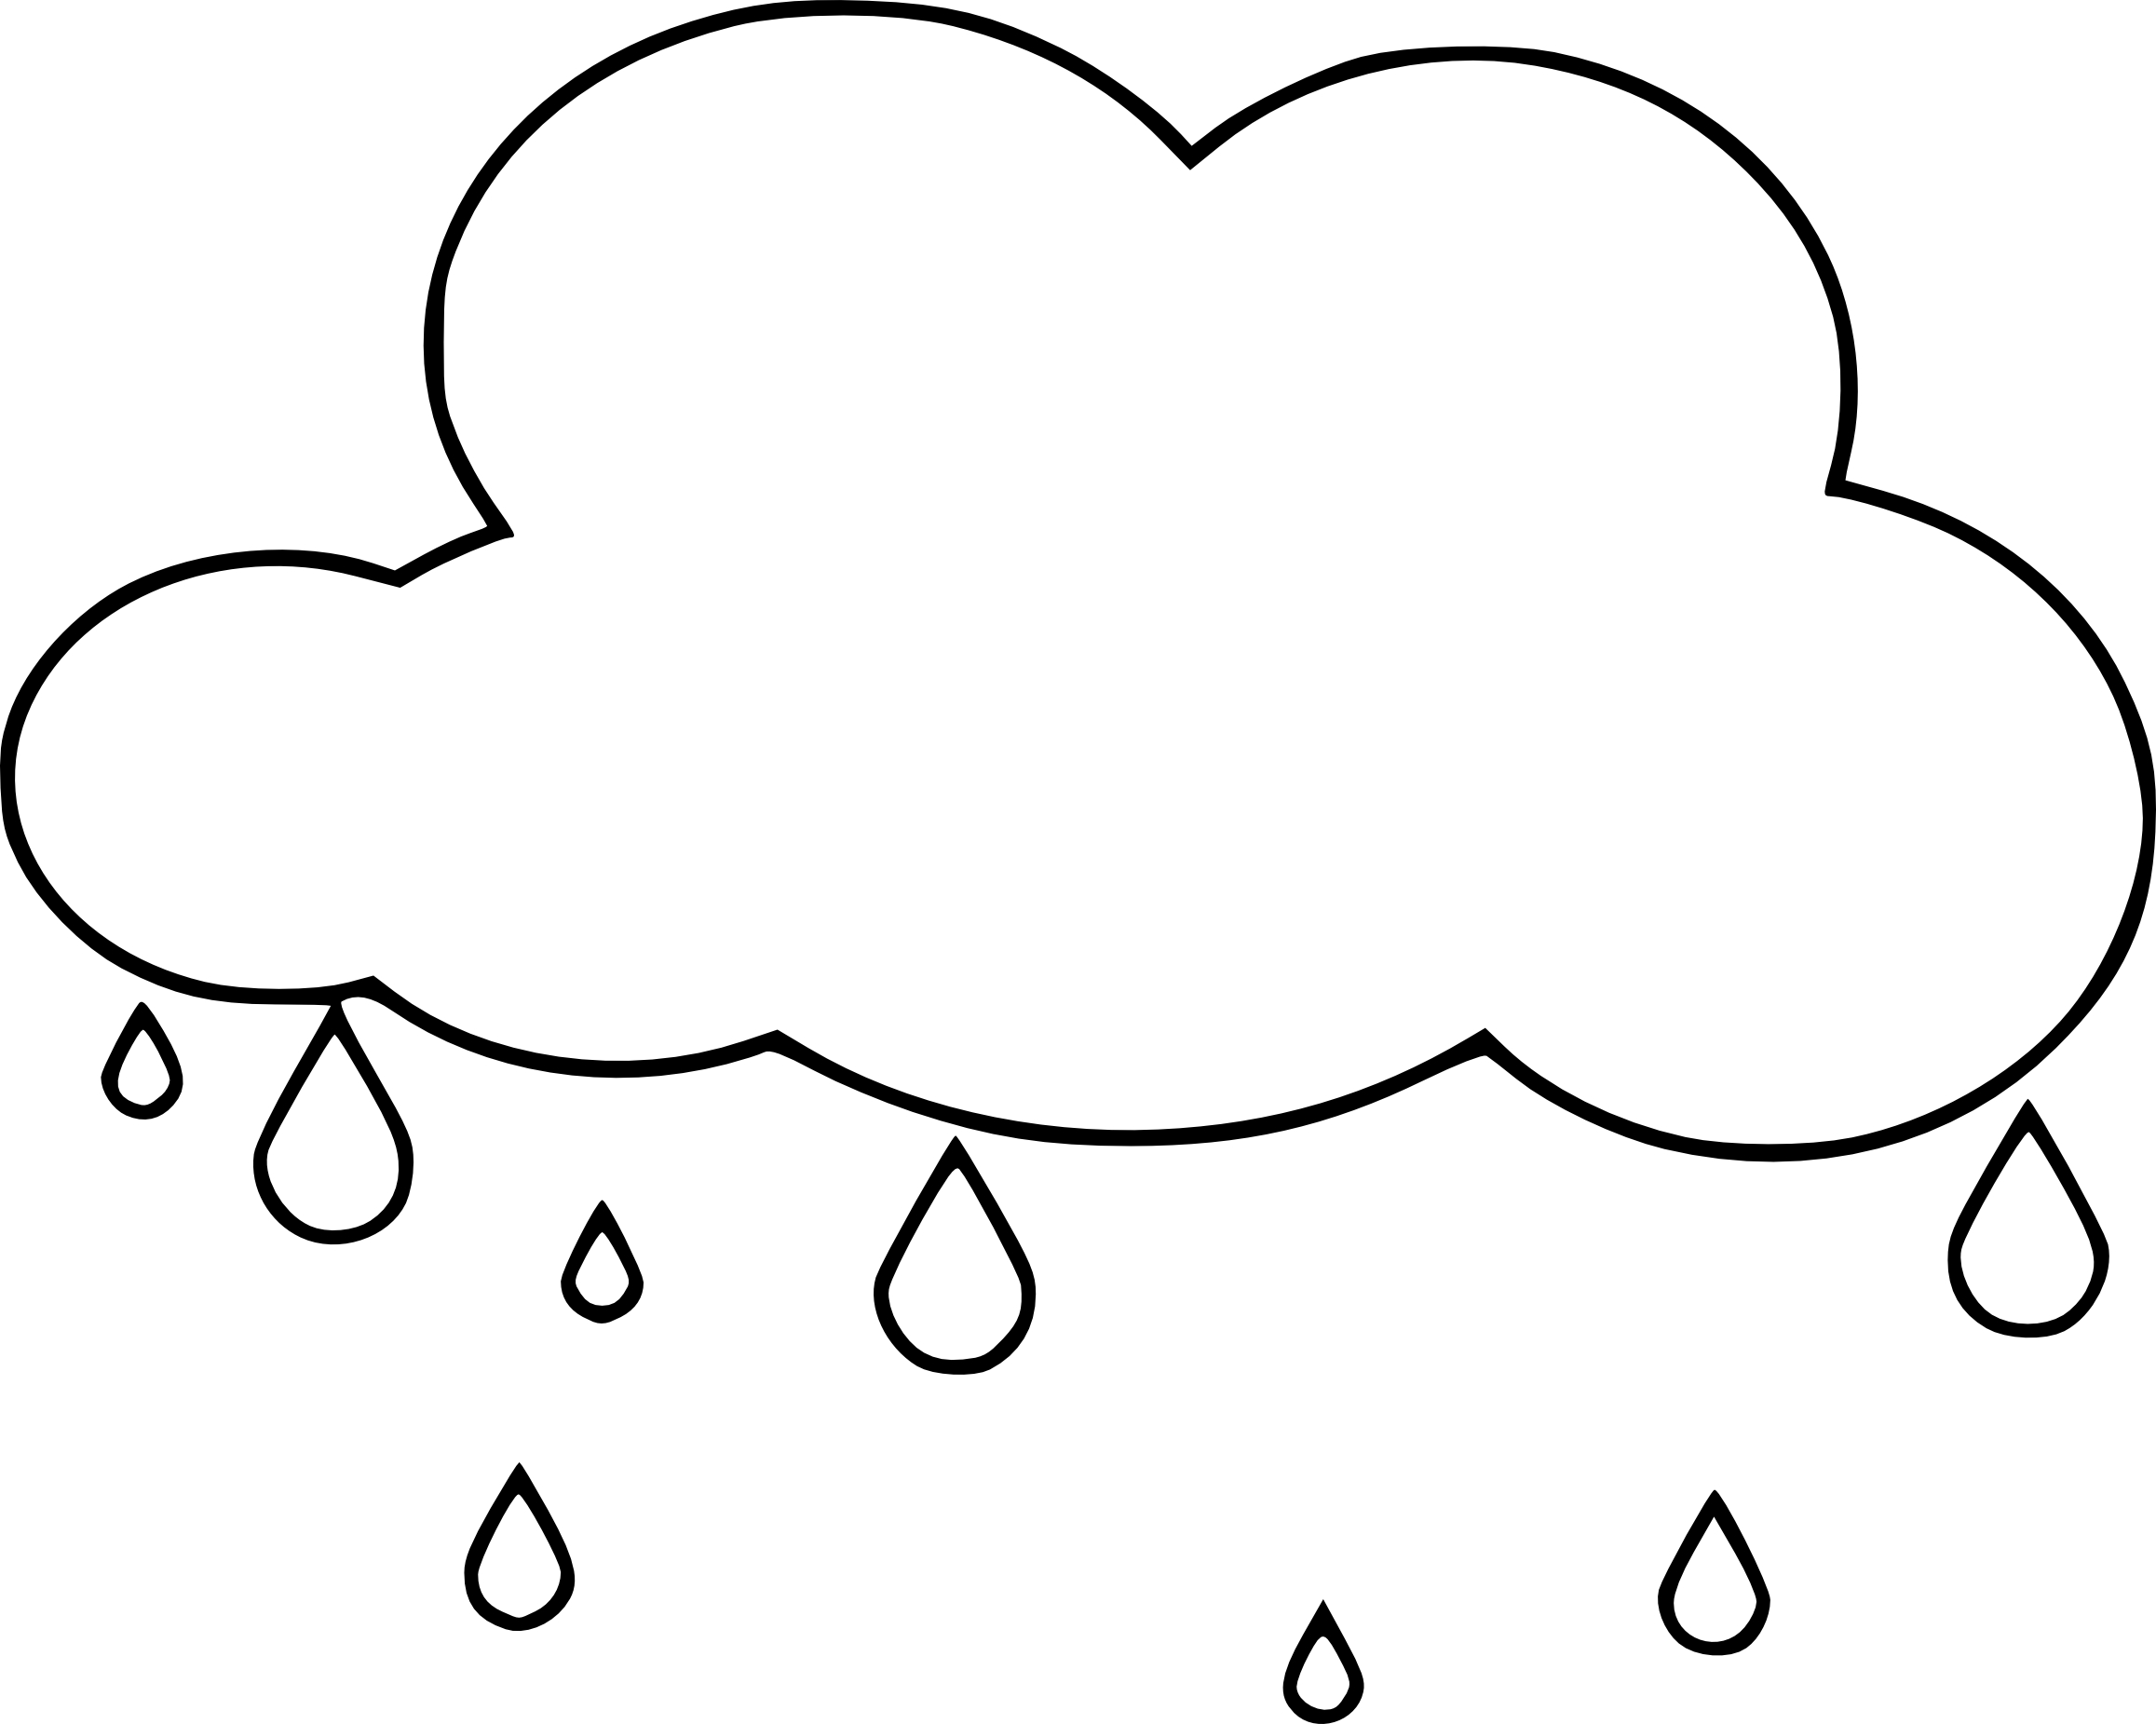 The Rain coloring page